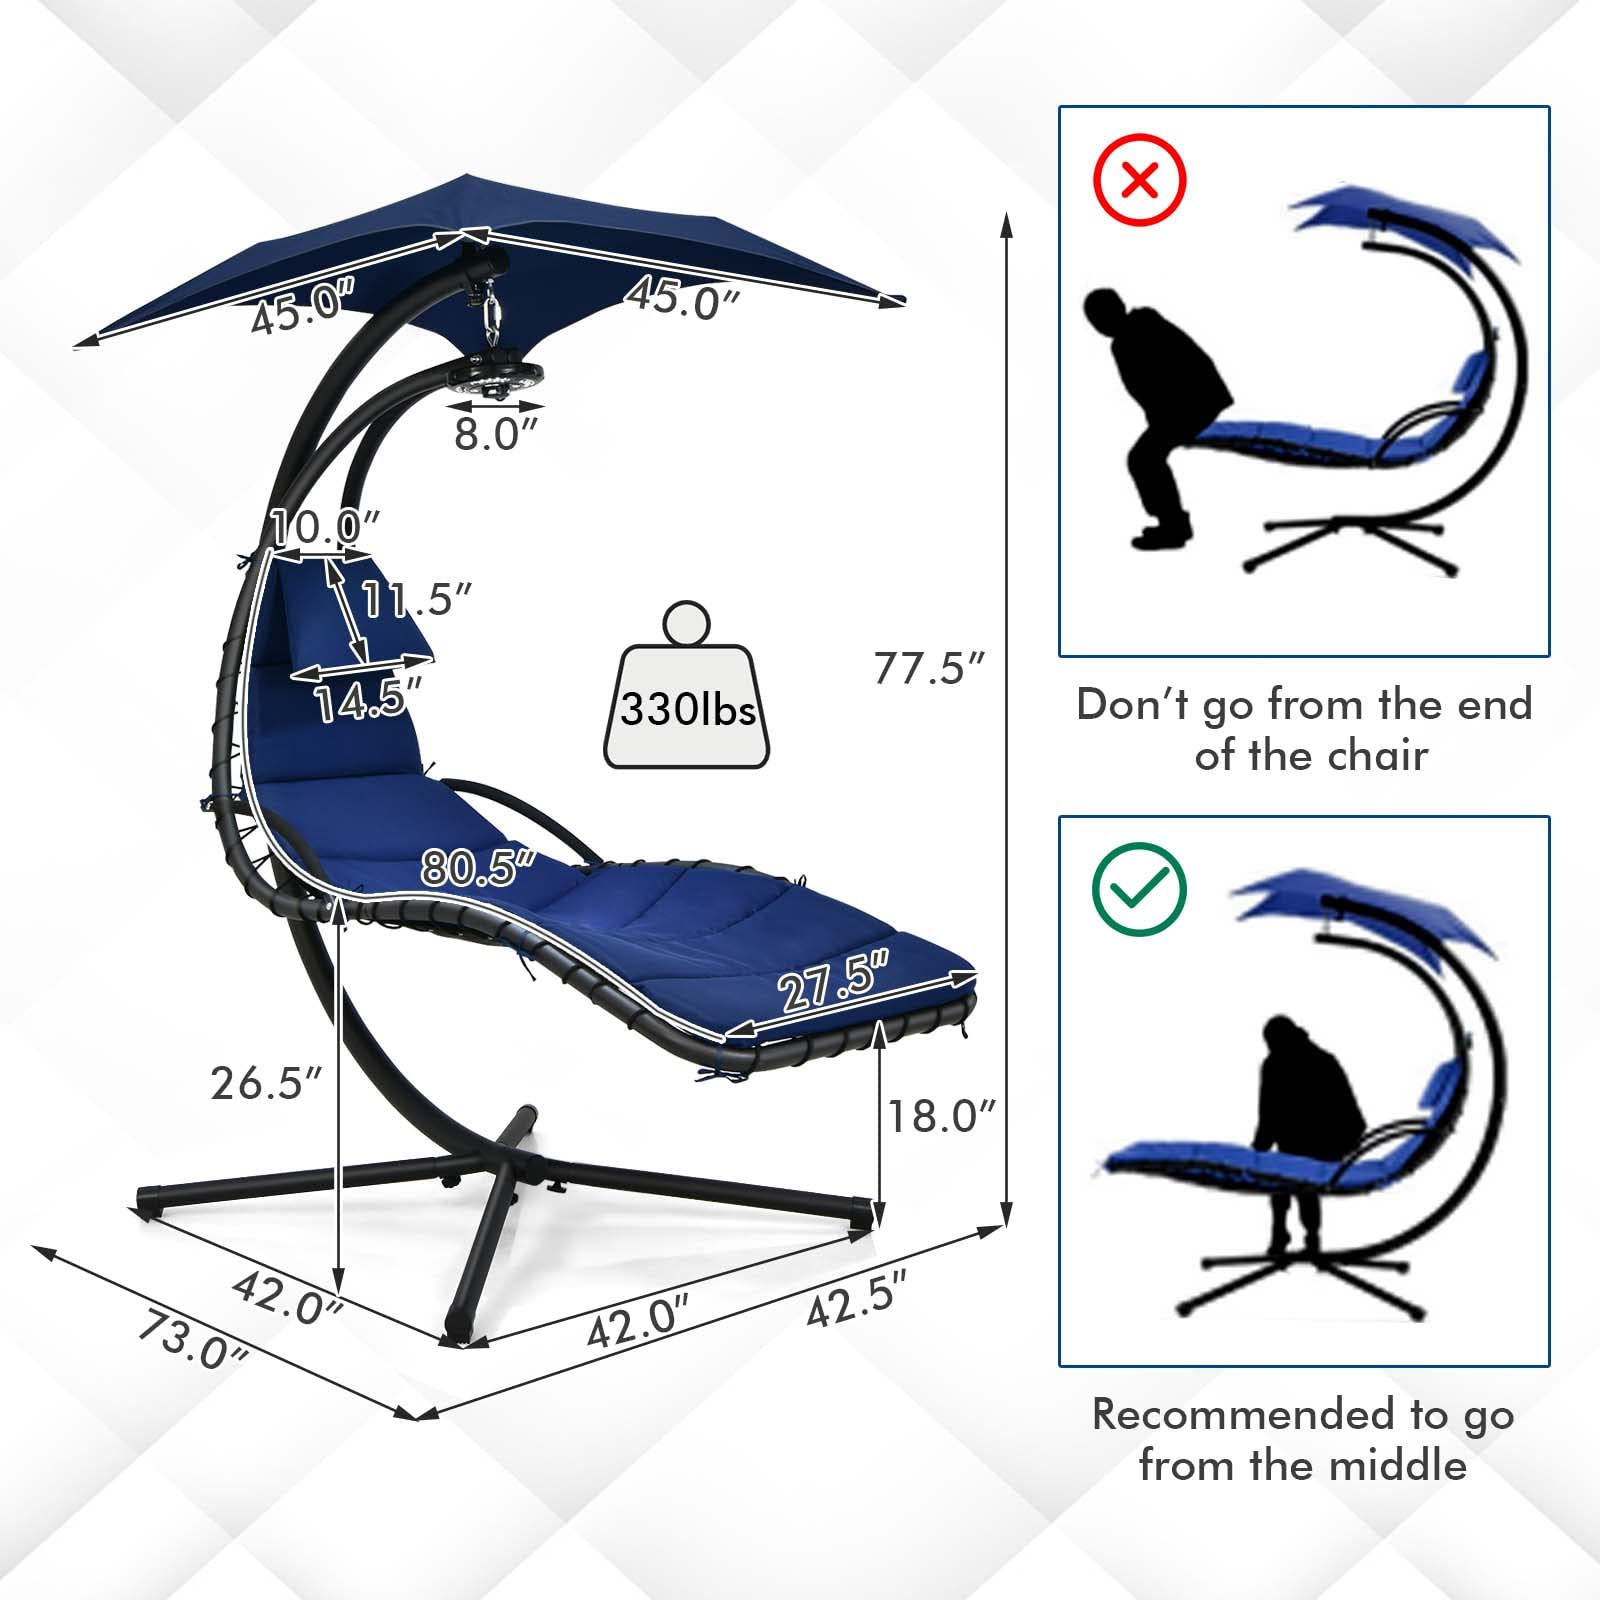 Giantex Hanging Chaise Outdoor Lounge Chair Porch Swing Hammock Chair with Arc Stand